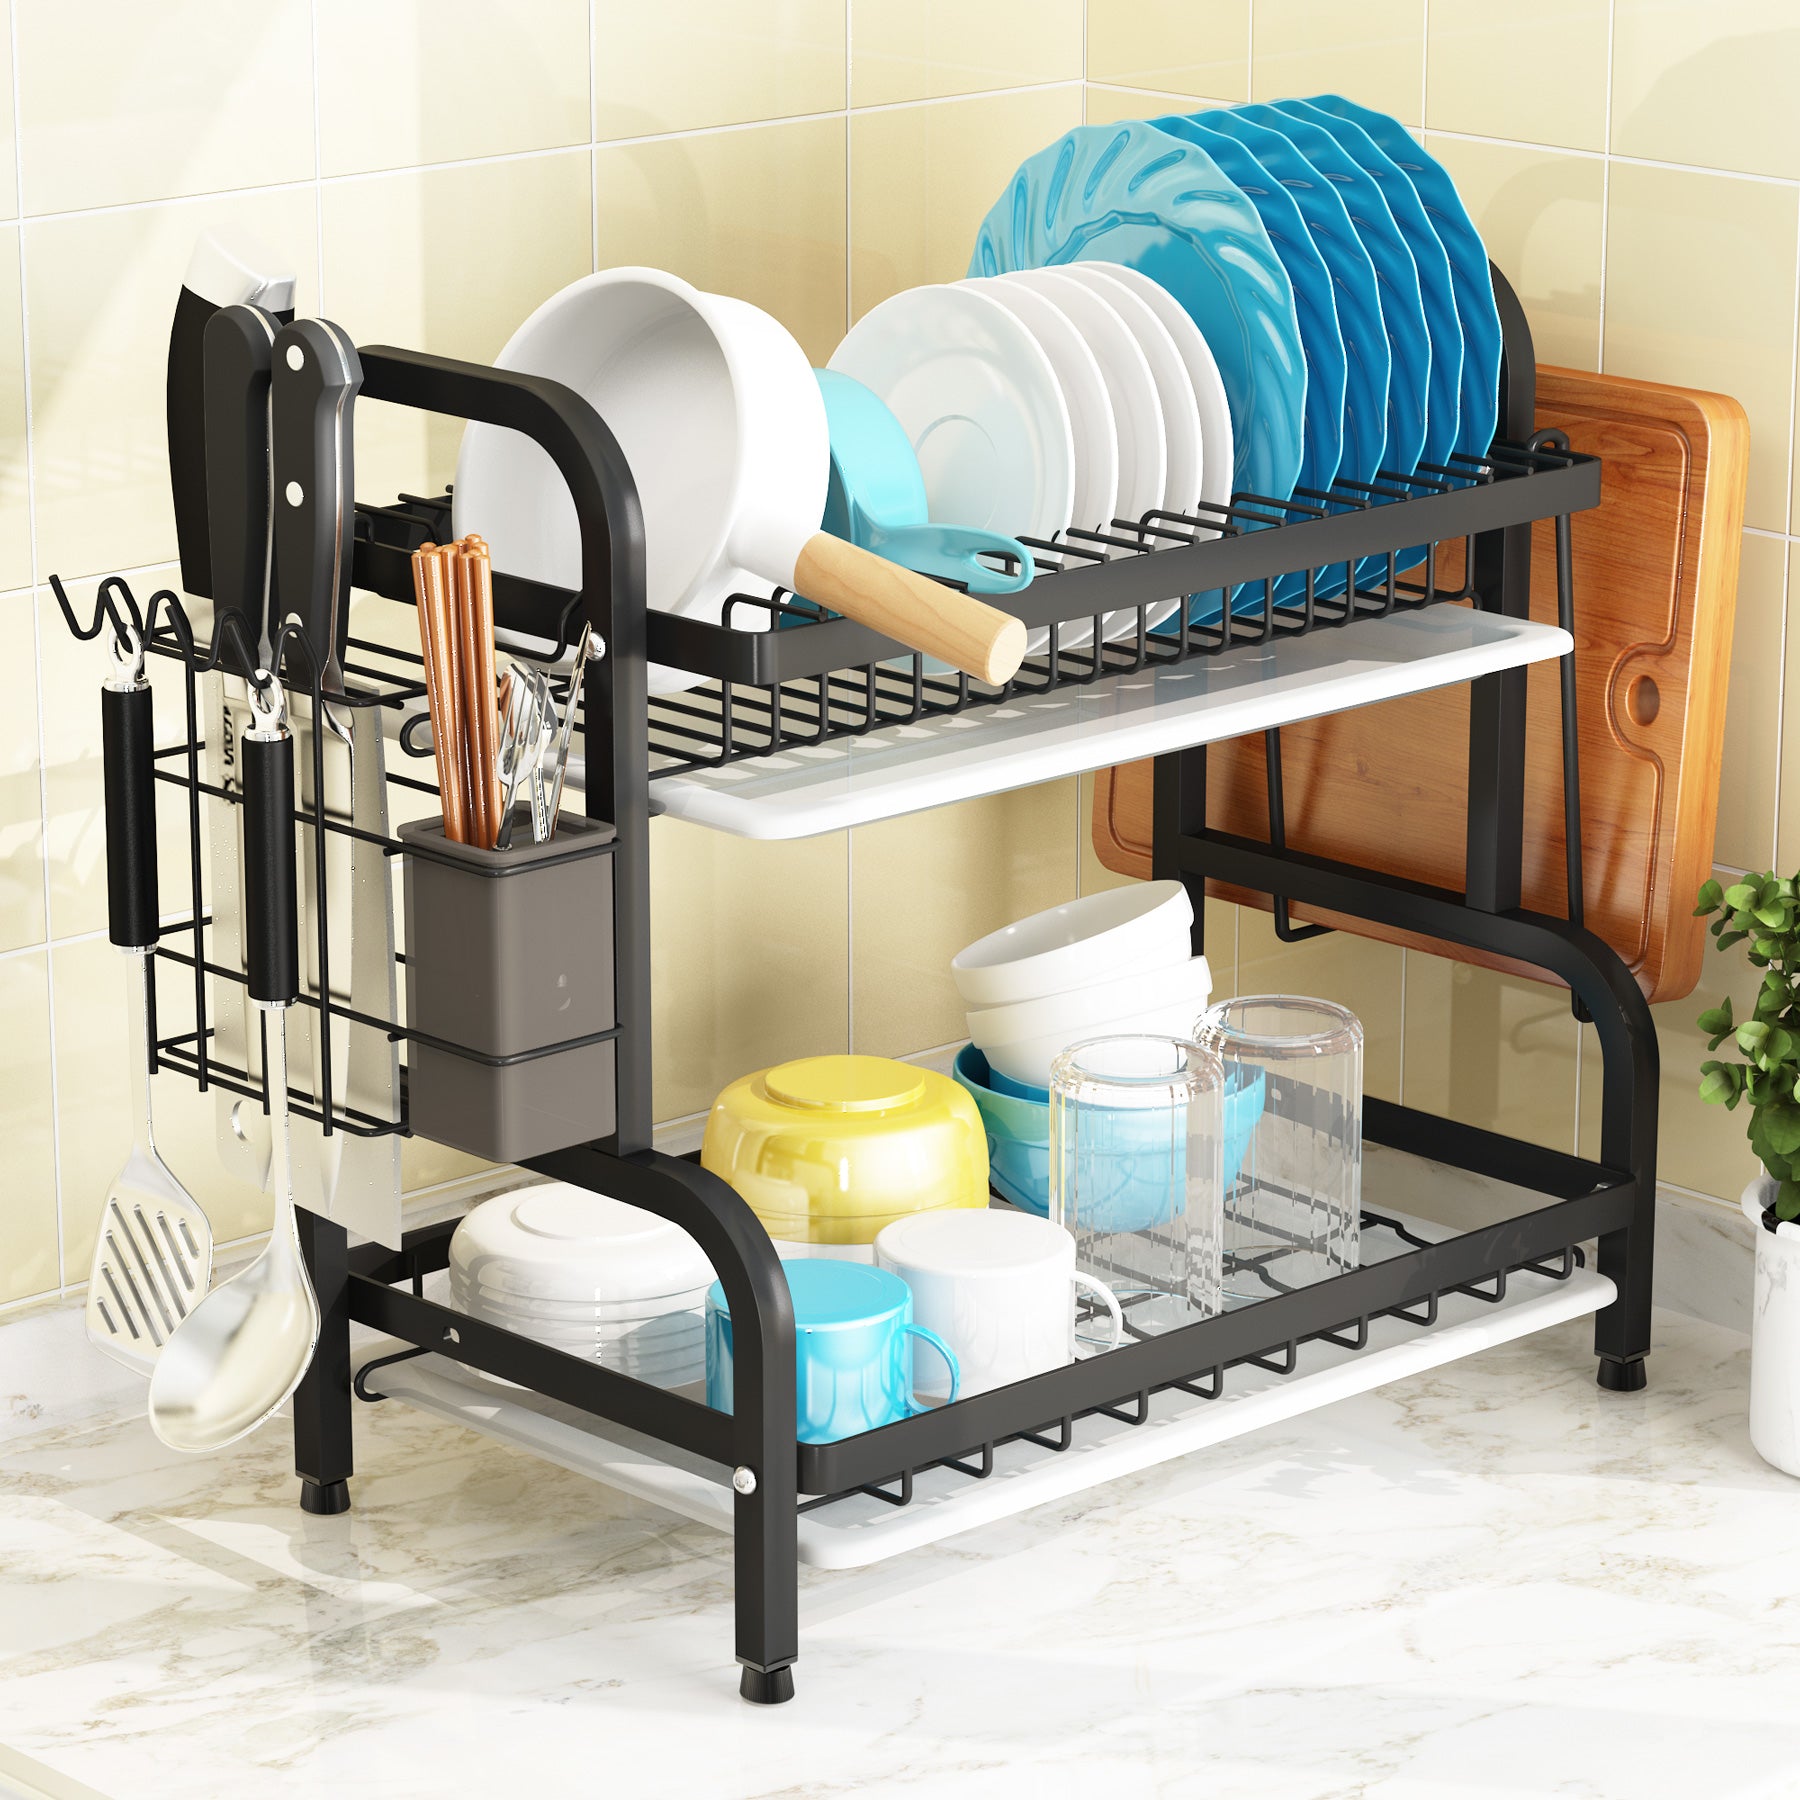 Dish Drying Rack - 2 Tier Dish Drying Rack and Norway